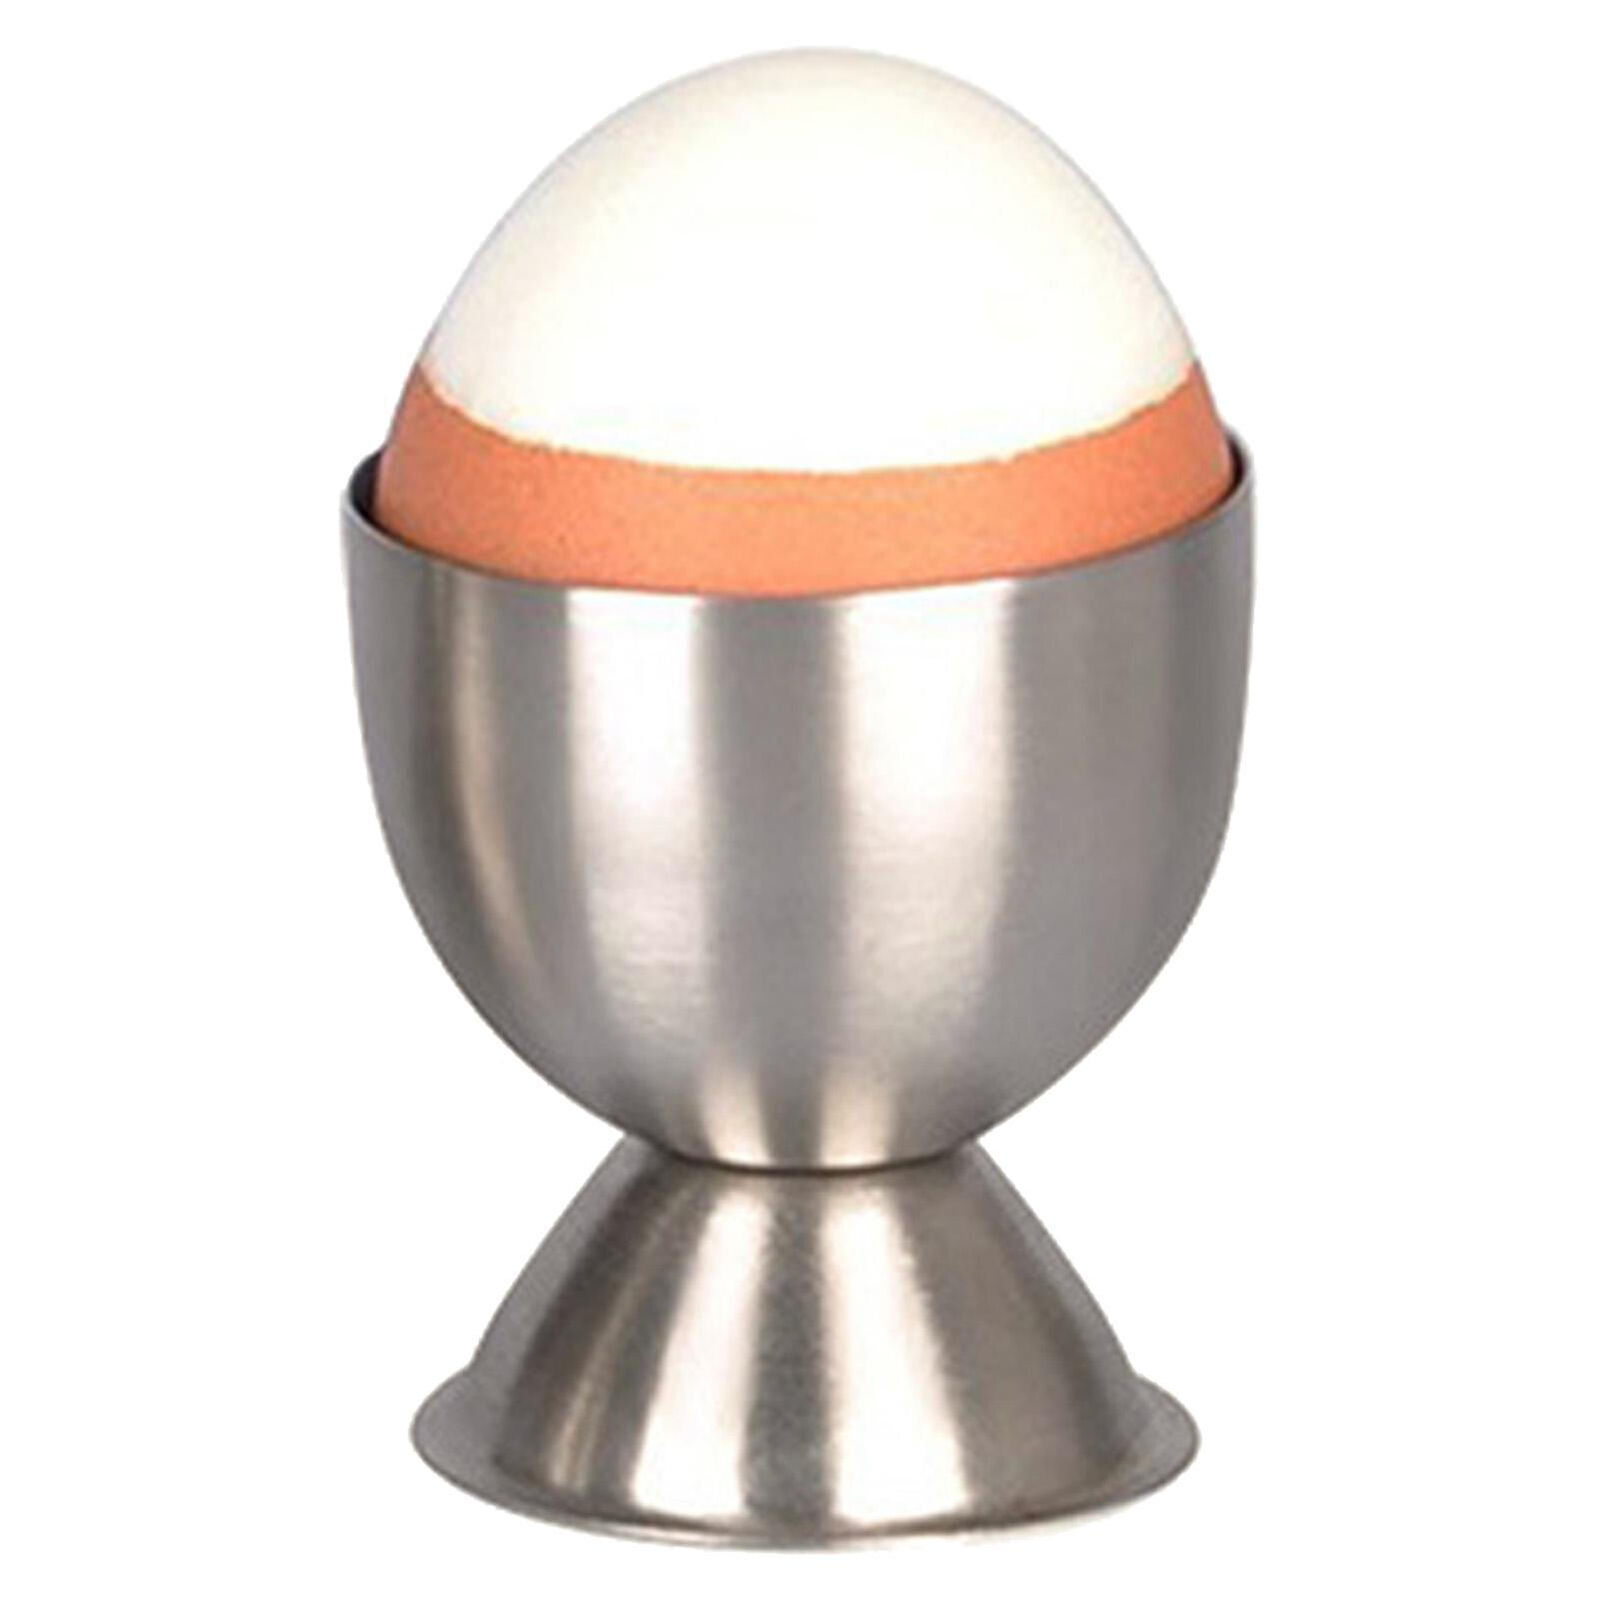 Egg Cup Stainless Steel Breakfast Soft Boiled Egg Holder with Stable Base